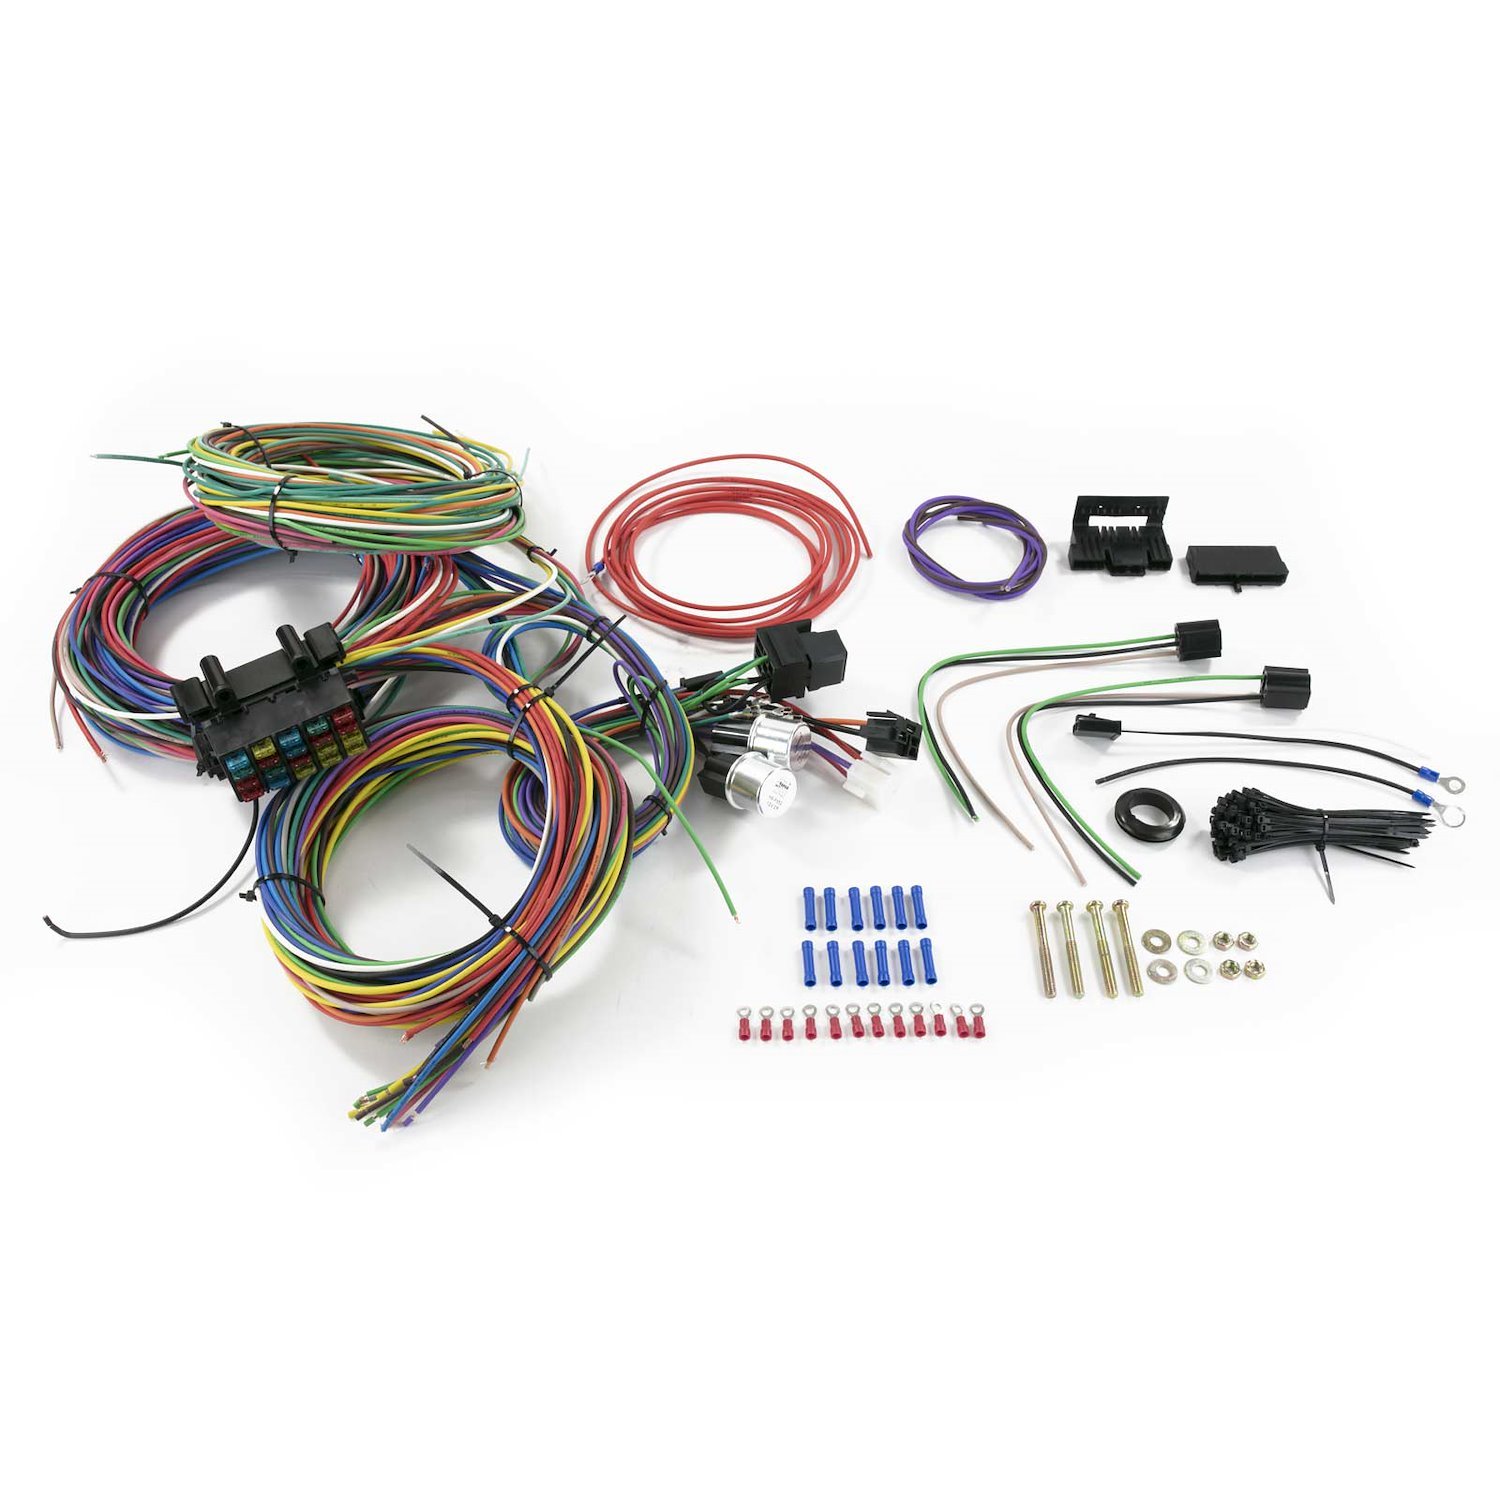 WH1220 Universal Wiring Harness, 20 Circuit